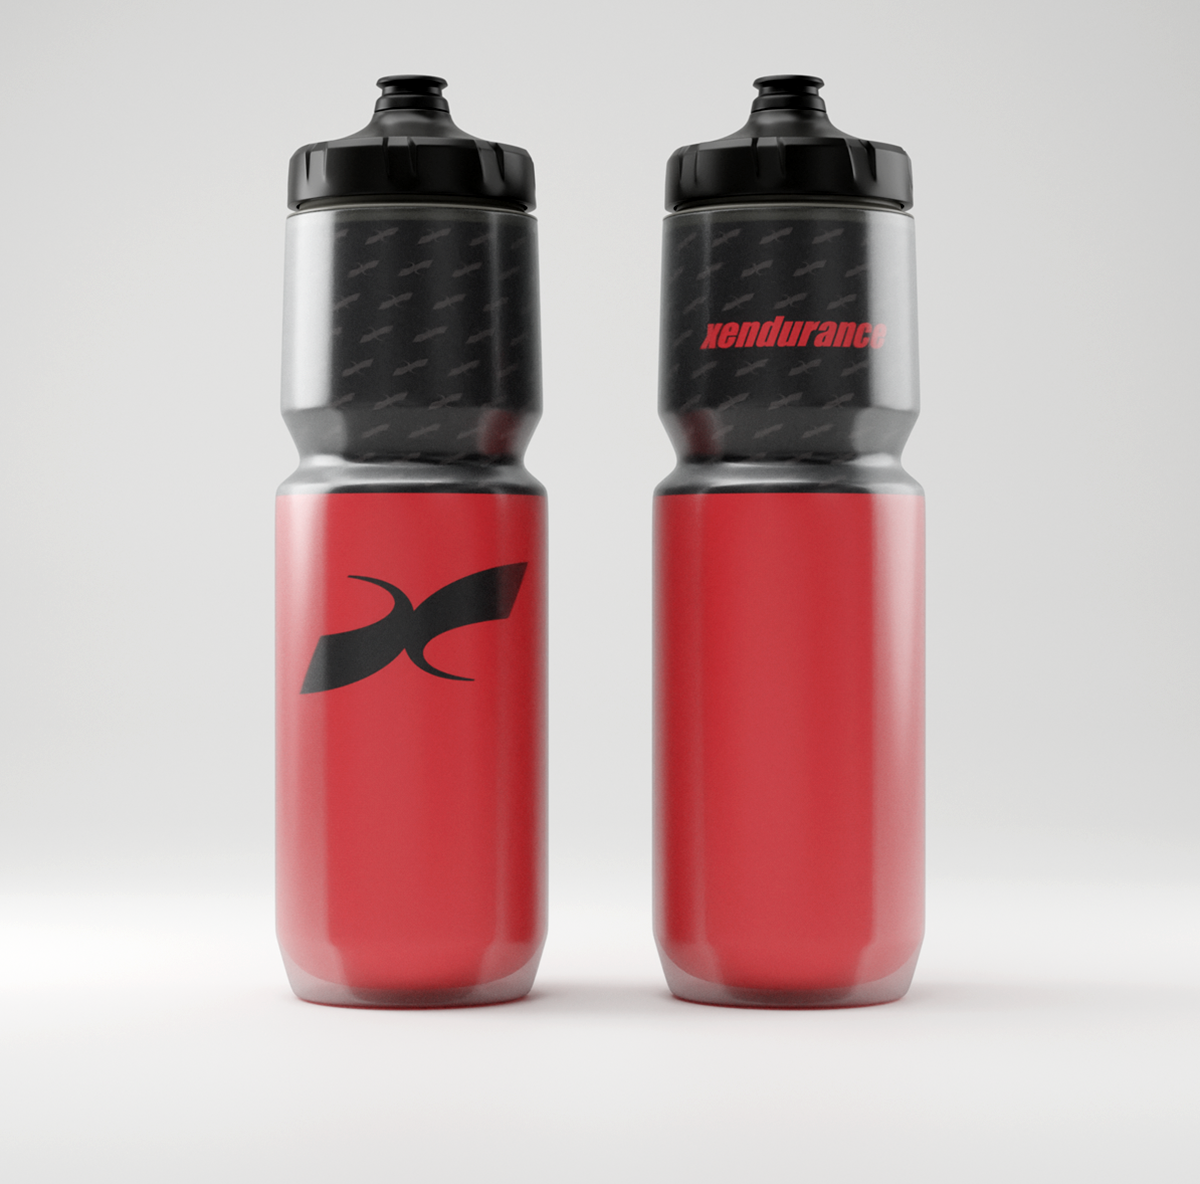 The Purist Insulated - xendurance